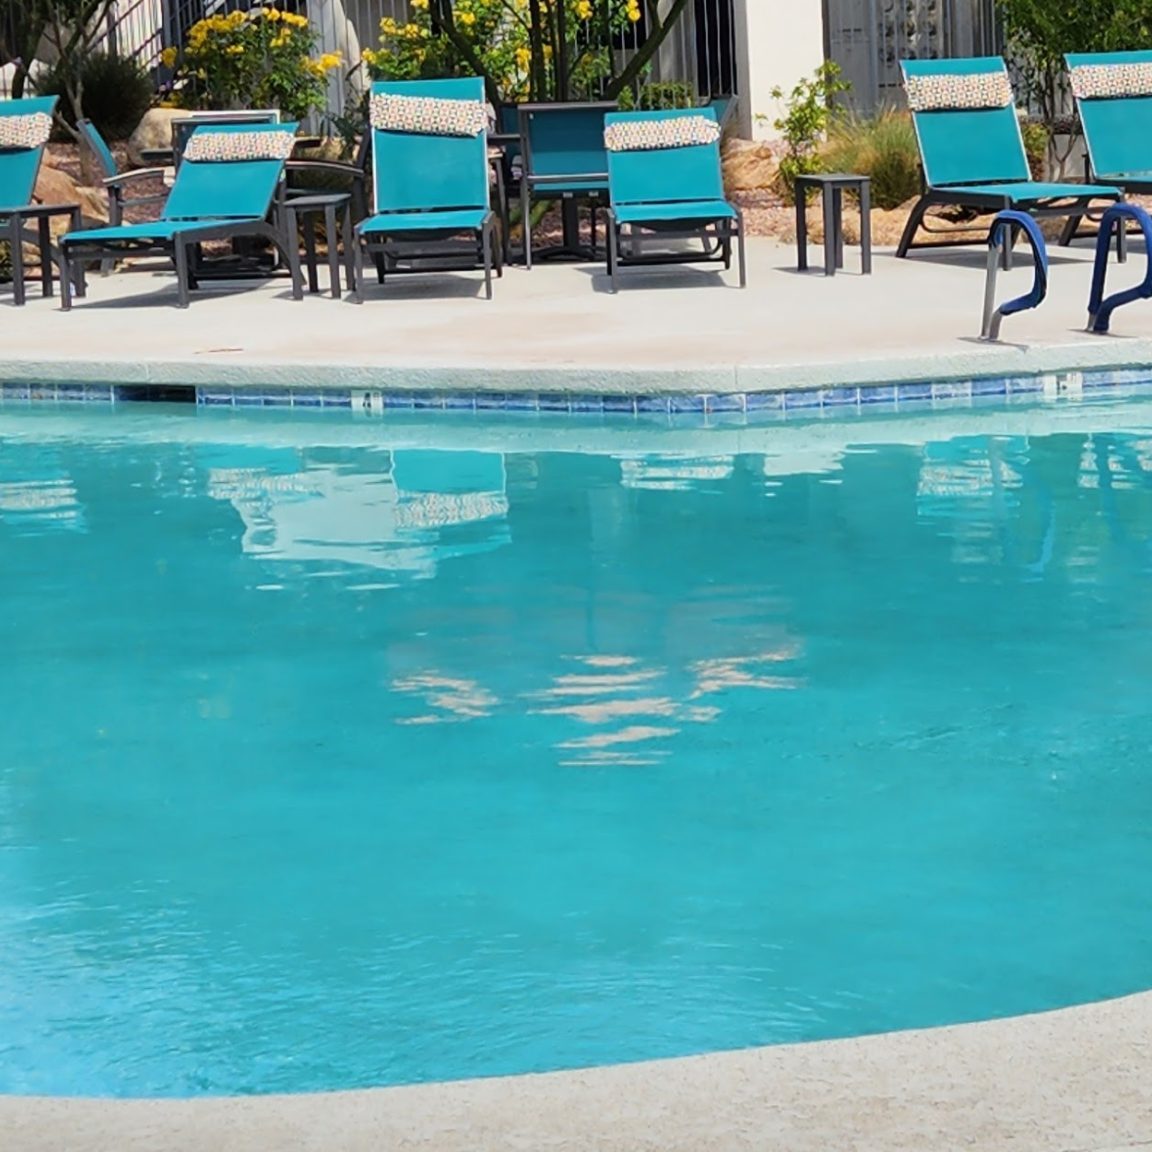 Maintaining a Pool | Sustainable Practices for Community Pool Preservation